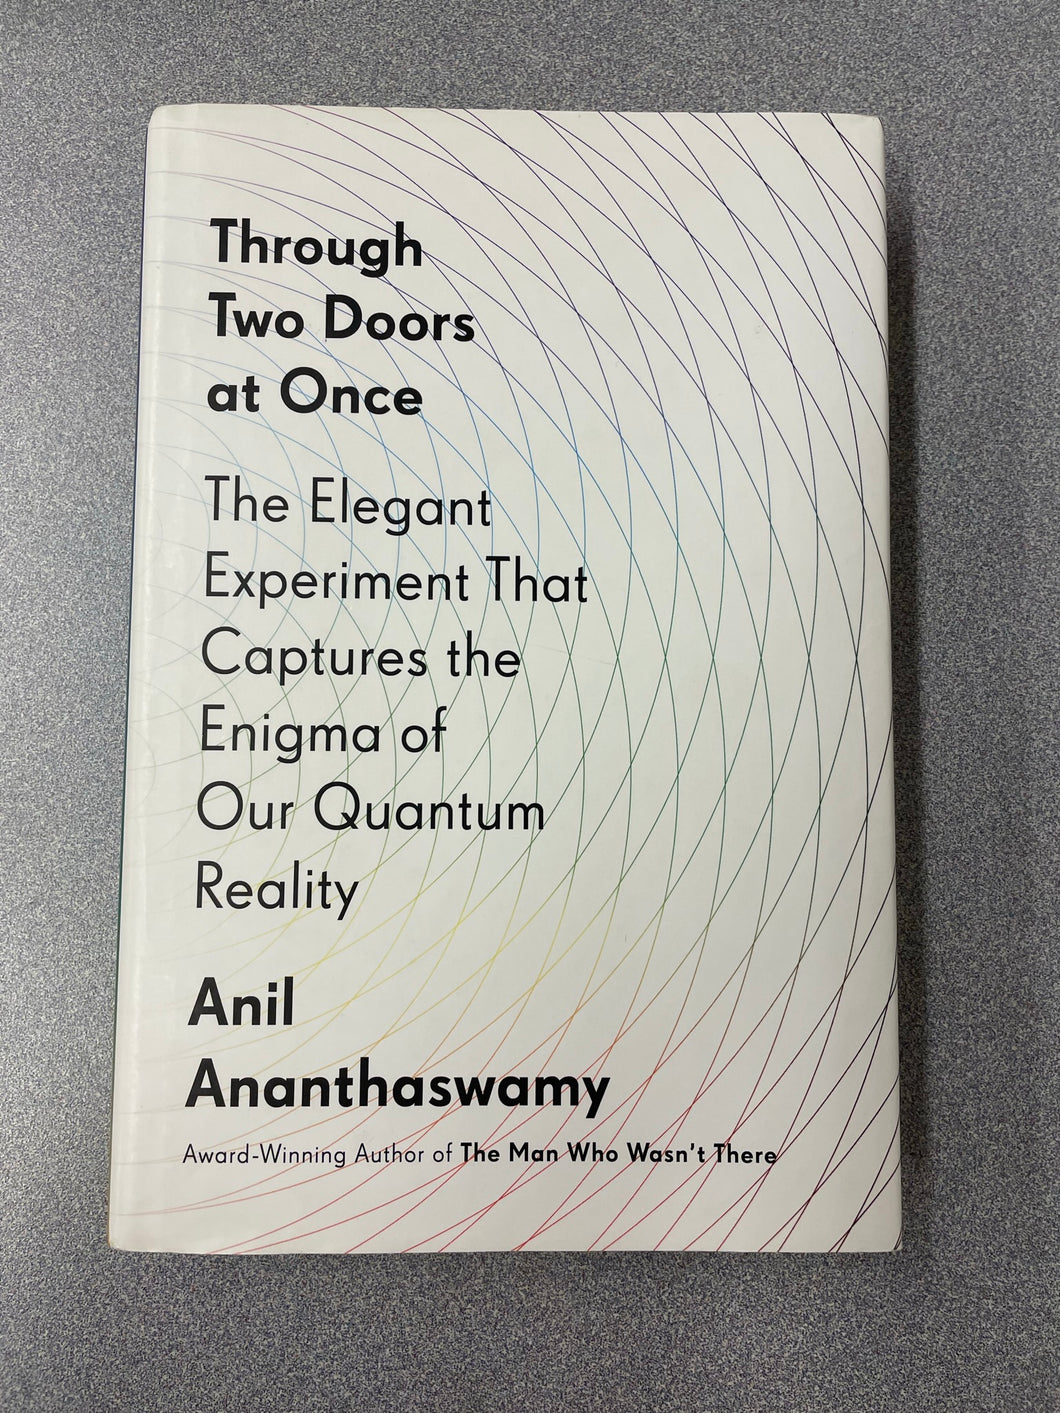 Through Two Doors at Once: The Elegant Experiment That Captures the Enigma of Our Quantum Reality, Ananthaswamy, Anil [2018] SN 12/22